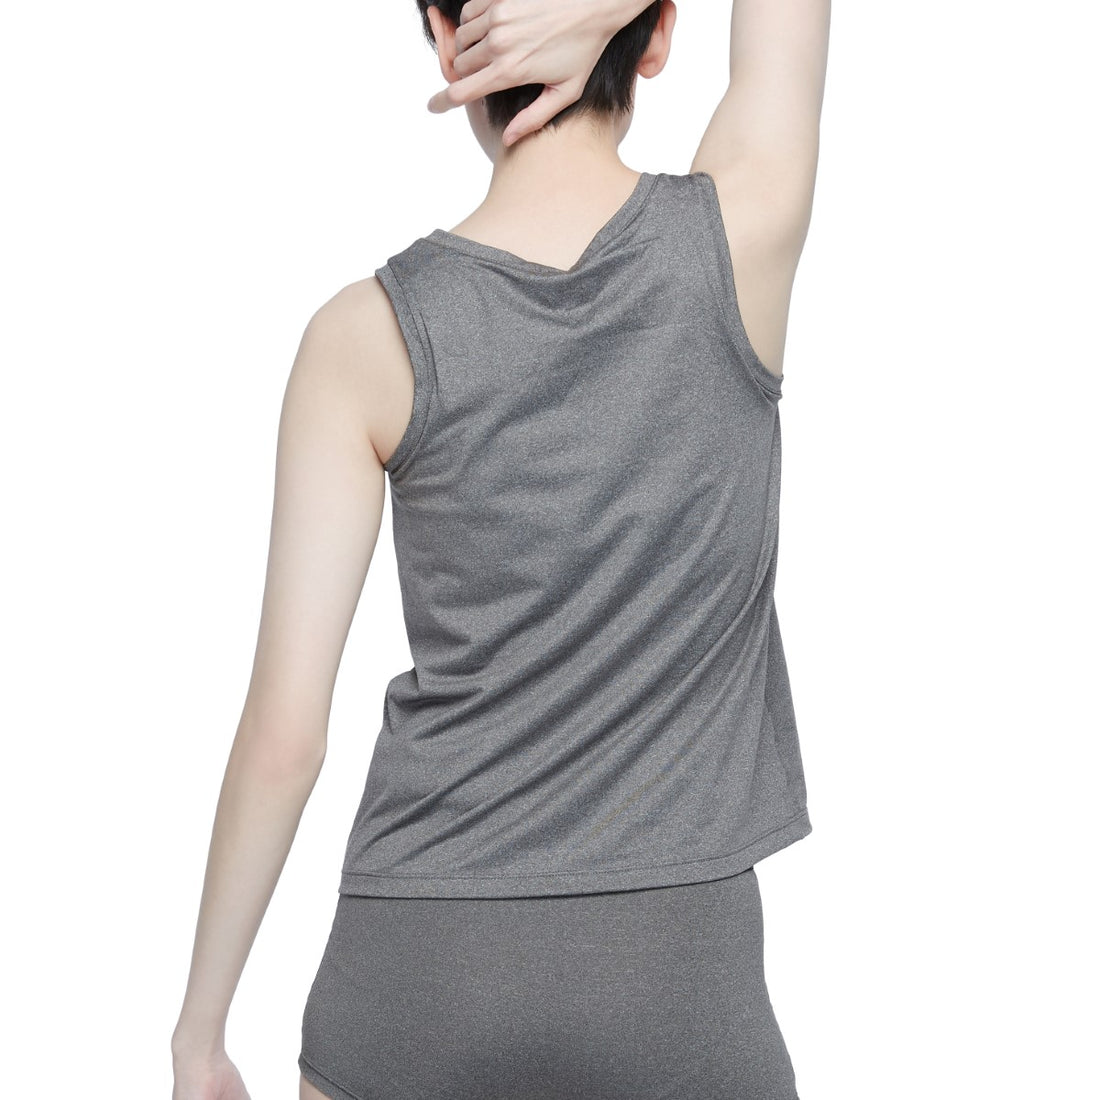 Wacoal FREEDOM Full body tank top (shirt and underwear) model WX1507+WX2602 gray and black (DG)